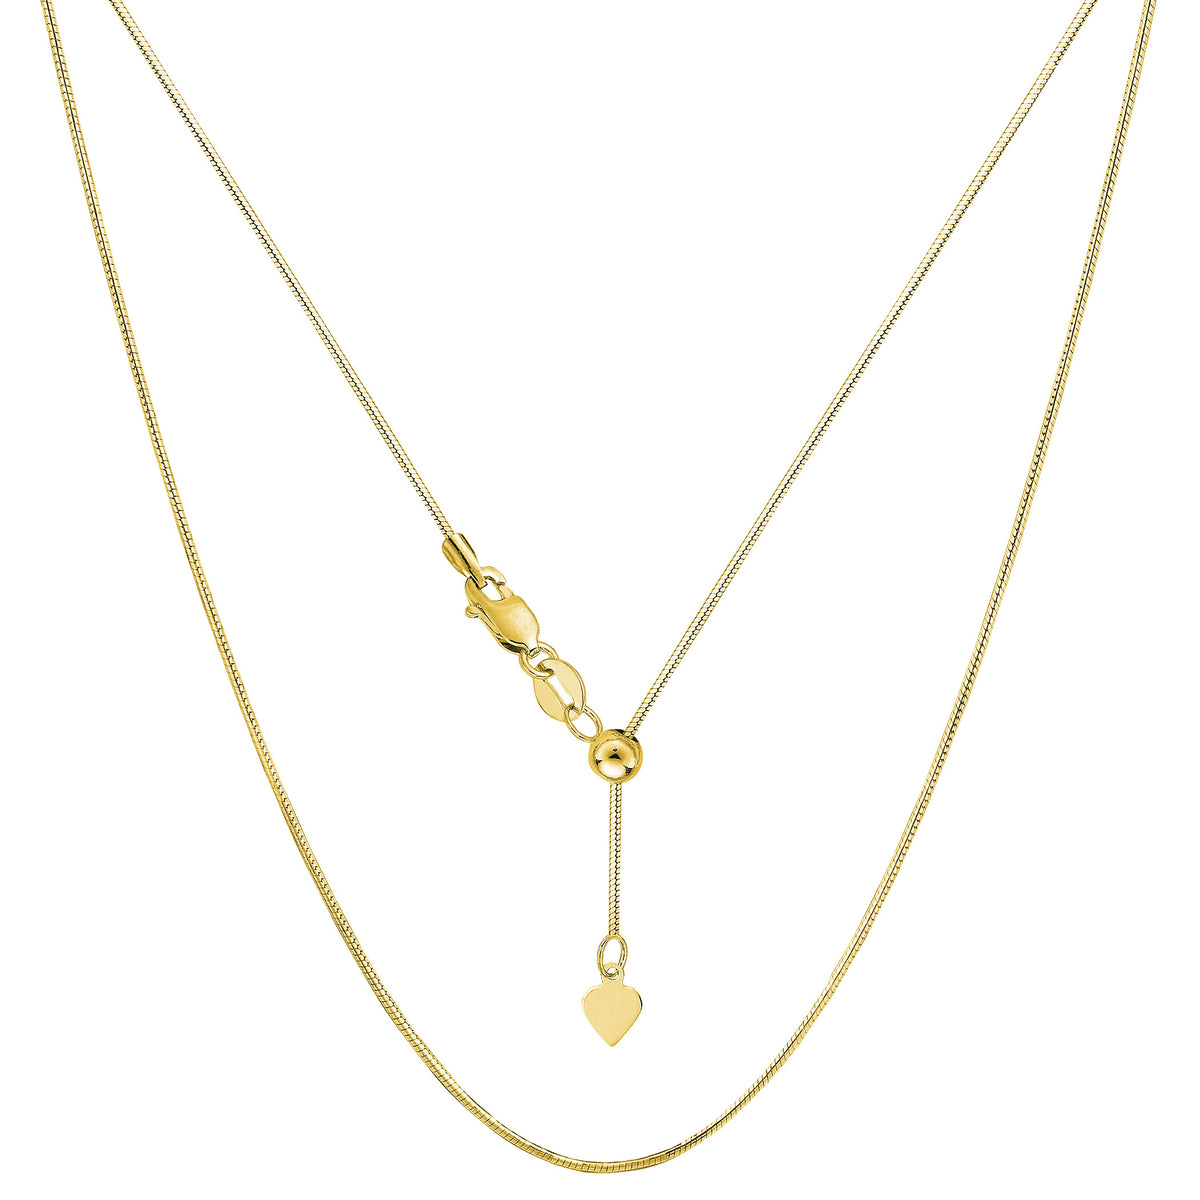 14k Yellow Gold Adjustable Octagonal Snake Chain Necklace, 0.85mm, 22"